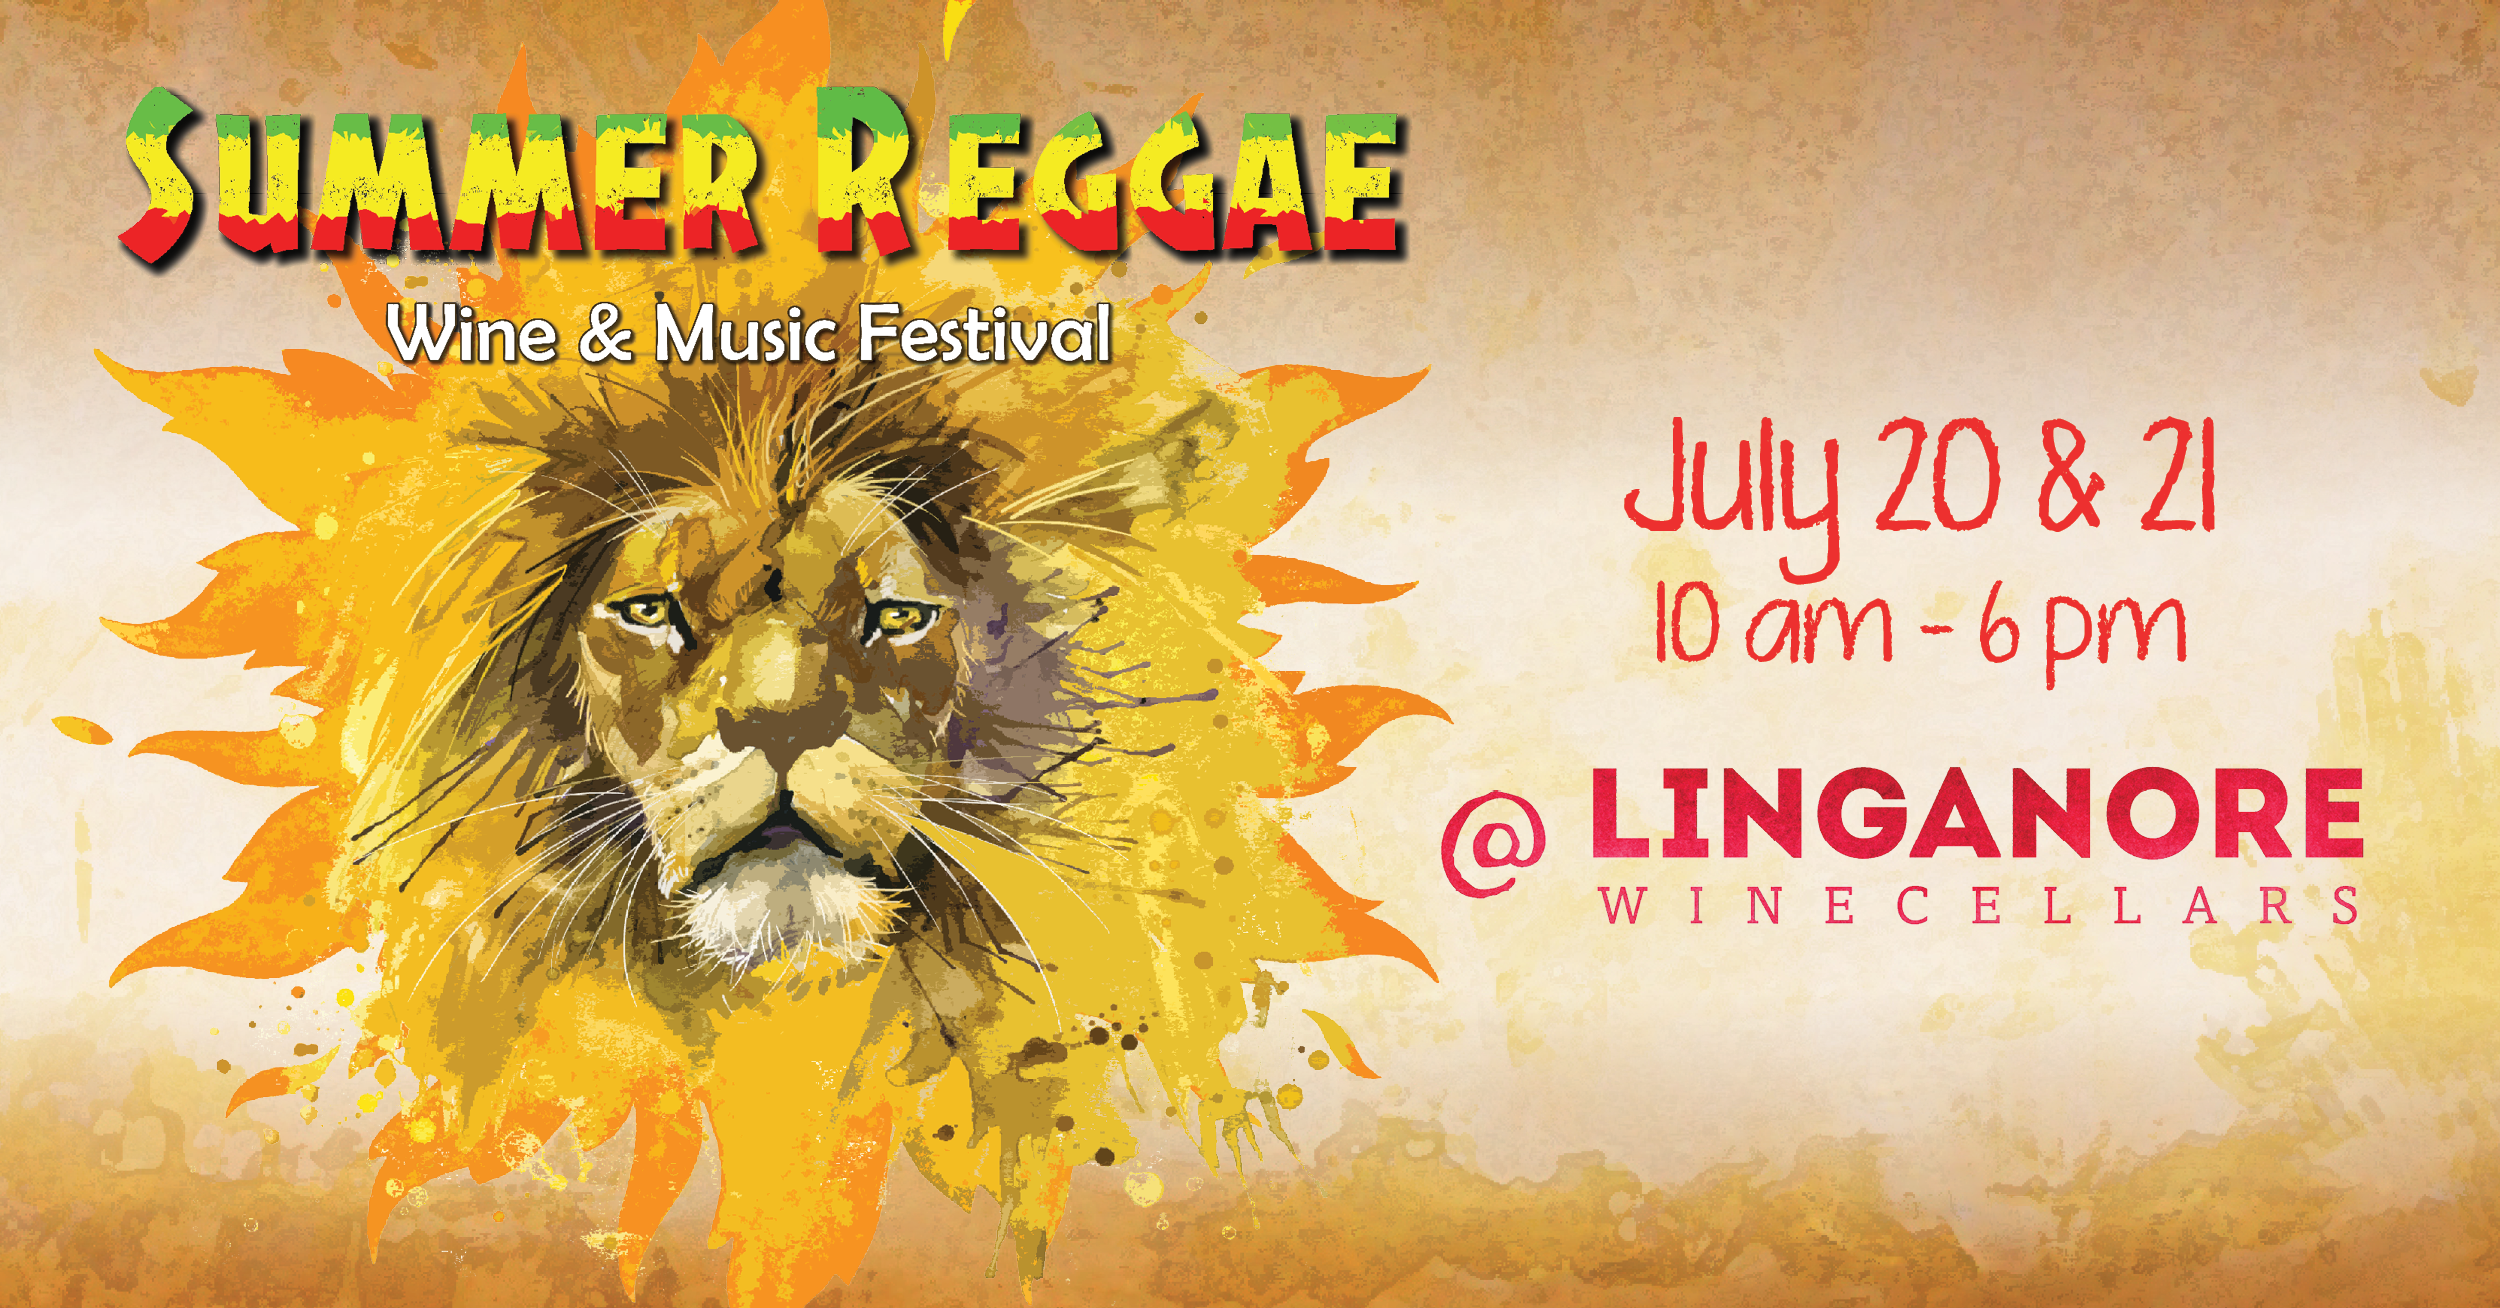 Summer Reggae is July 20 and 21